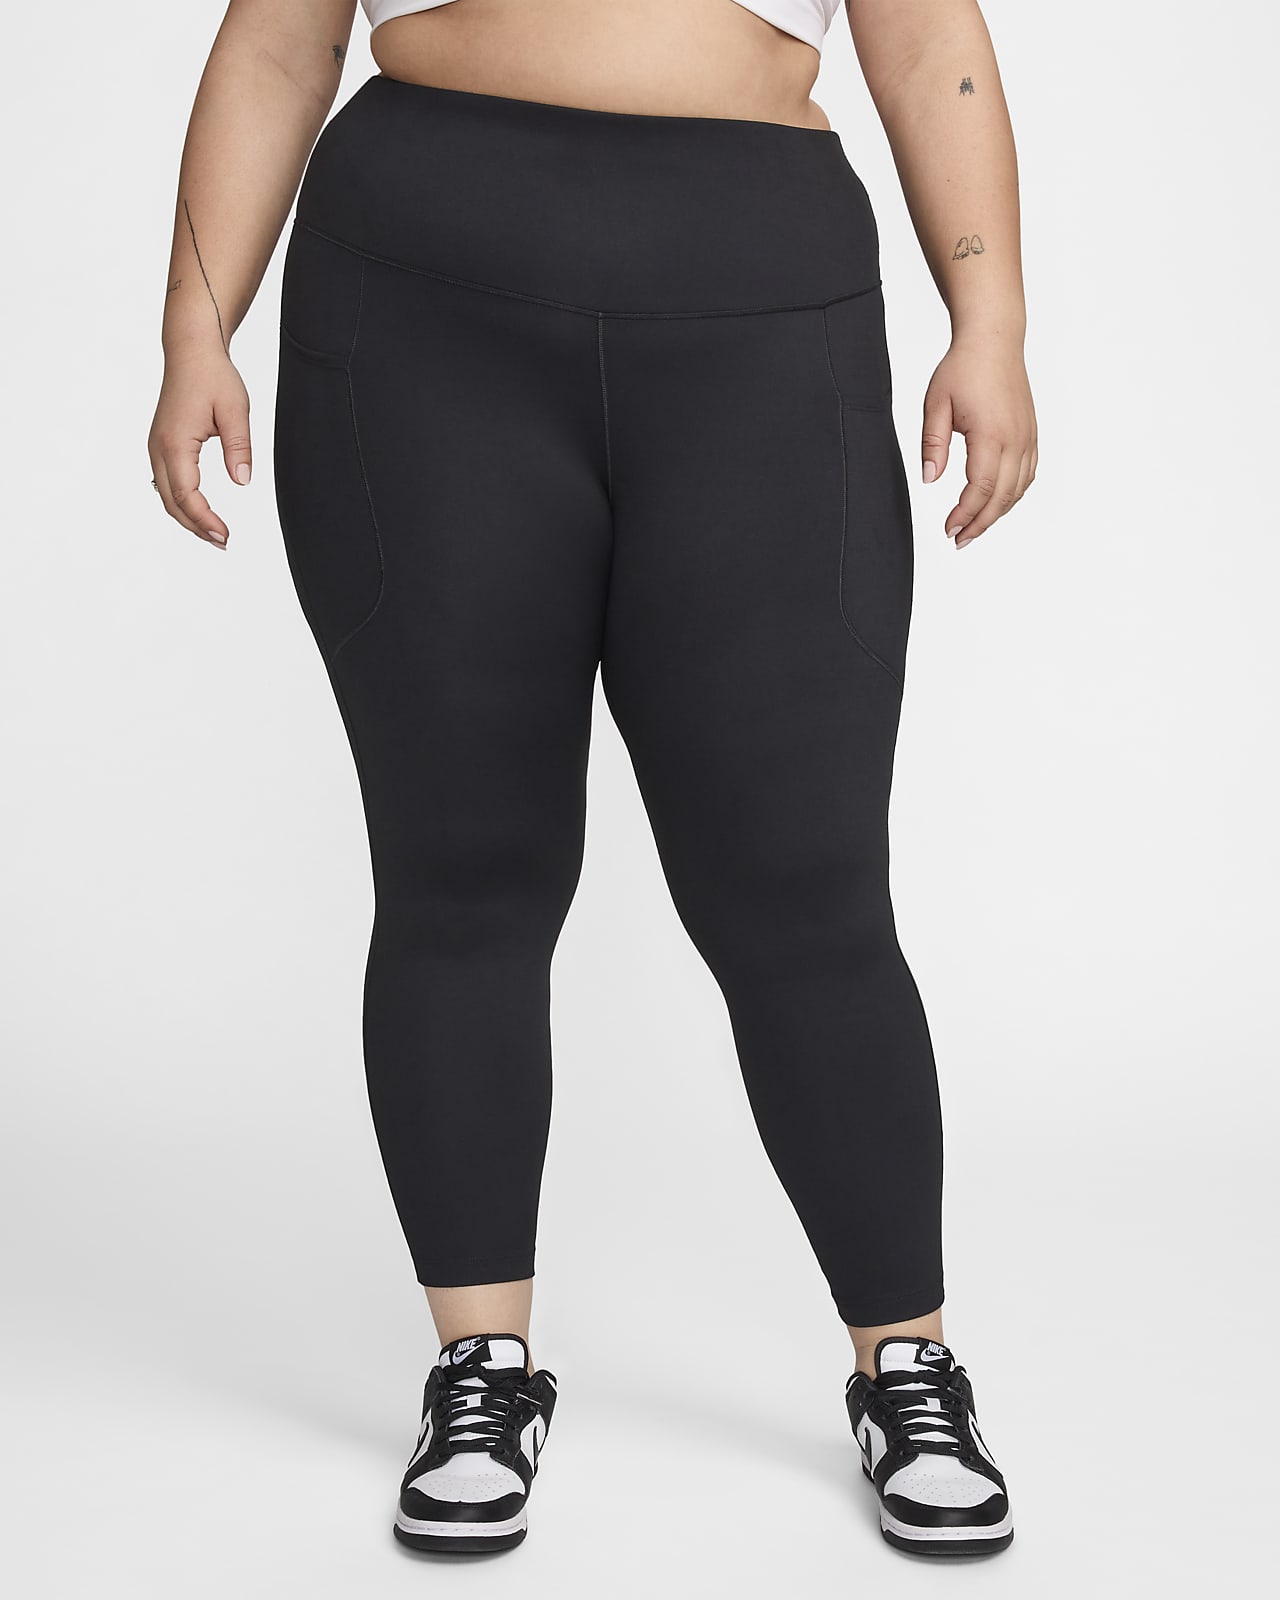 Nike One Women's High-Waisted 7/8 Leggings with Pockets (Plus Size)